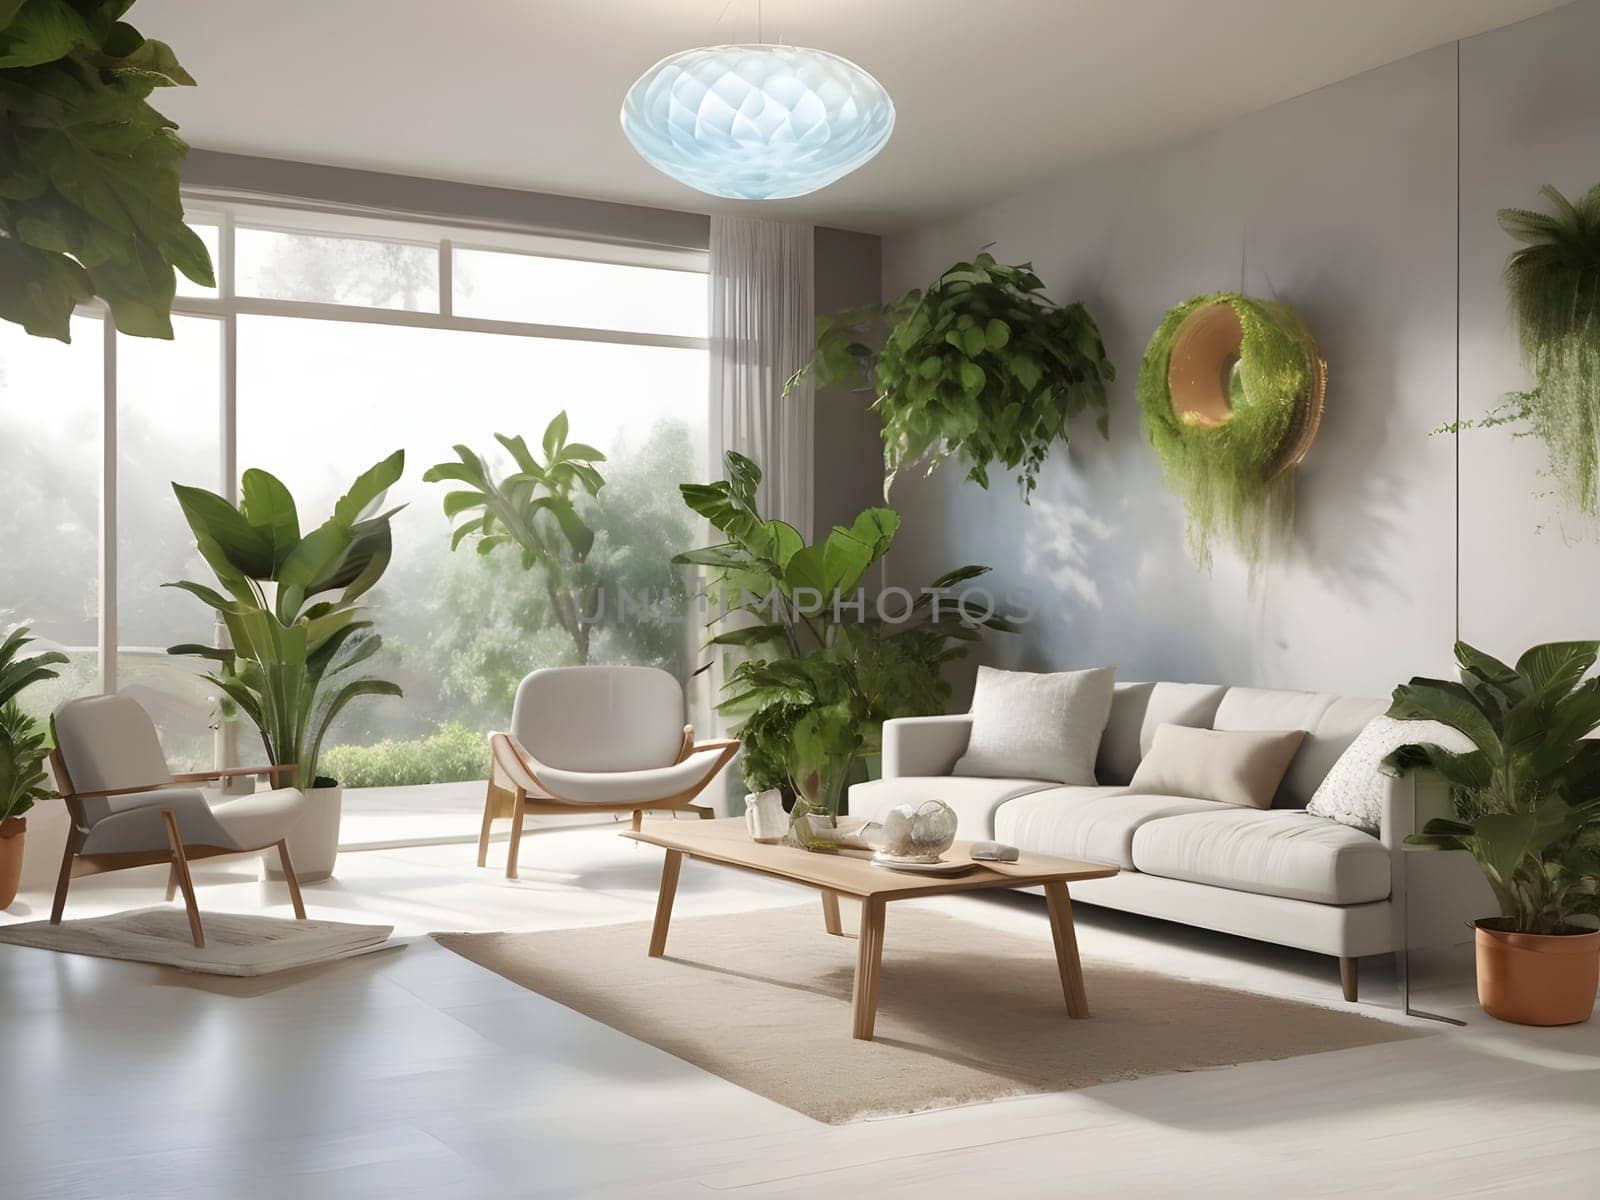 Purifying Spaces. Visualizing a Clean and Healthy Home Environment.